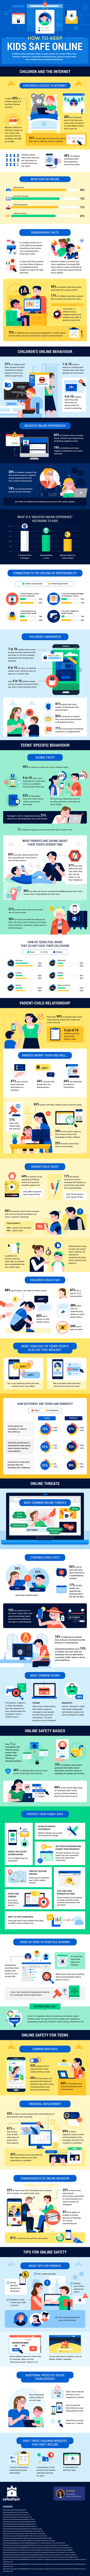 SafeAtLast infographic: keep your kid safe online | From the blog of Nicholas C. Rossis, author of science fiction, the Pearseus epic fantasy series and children's book